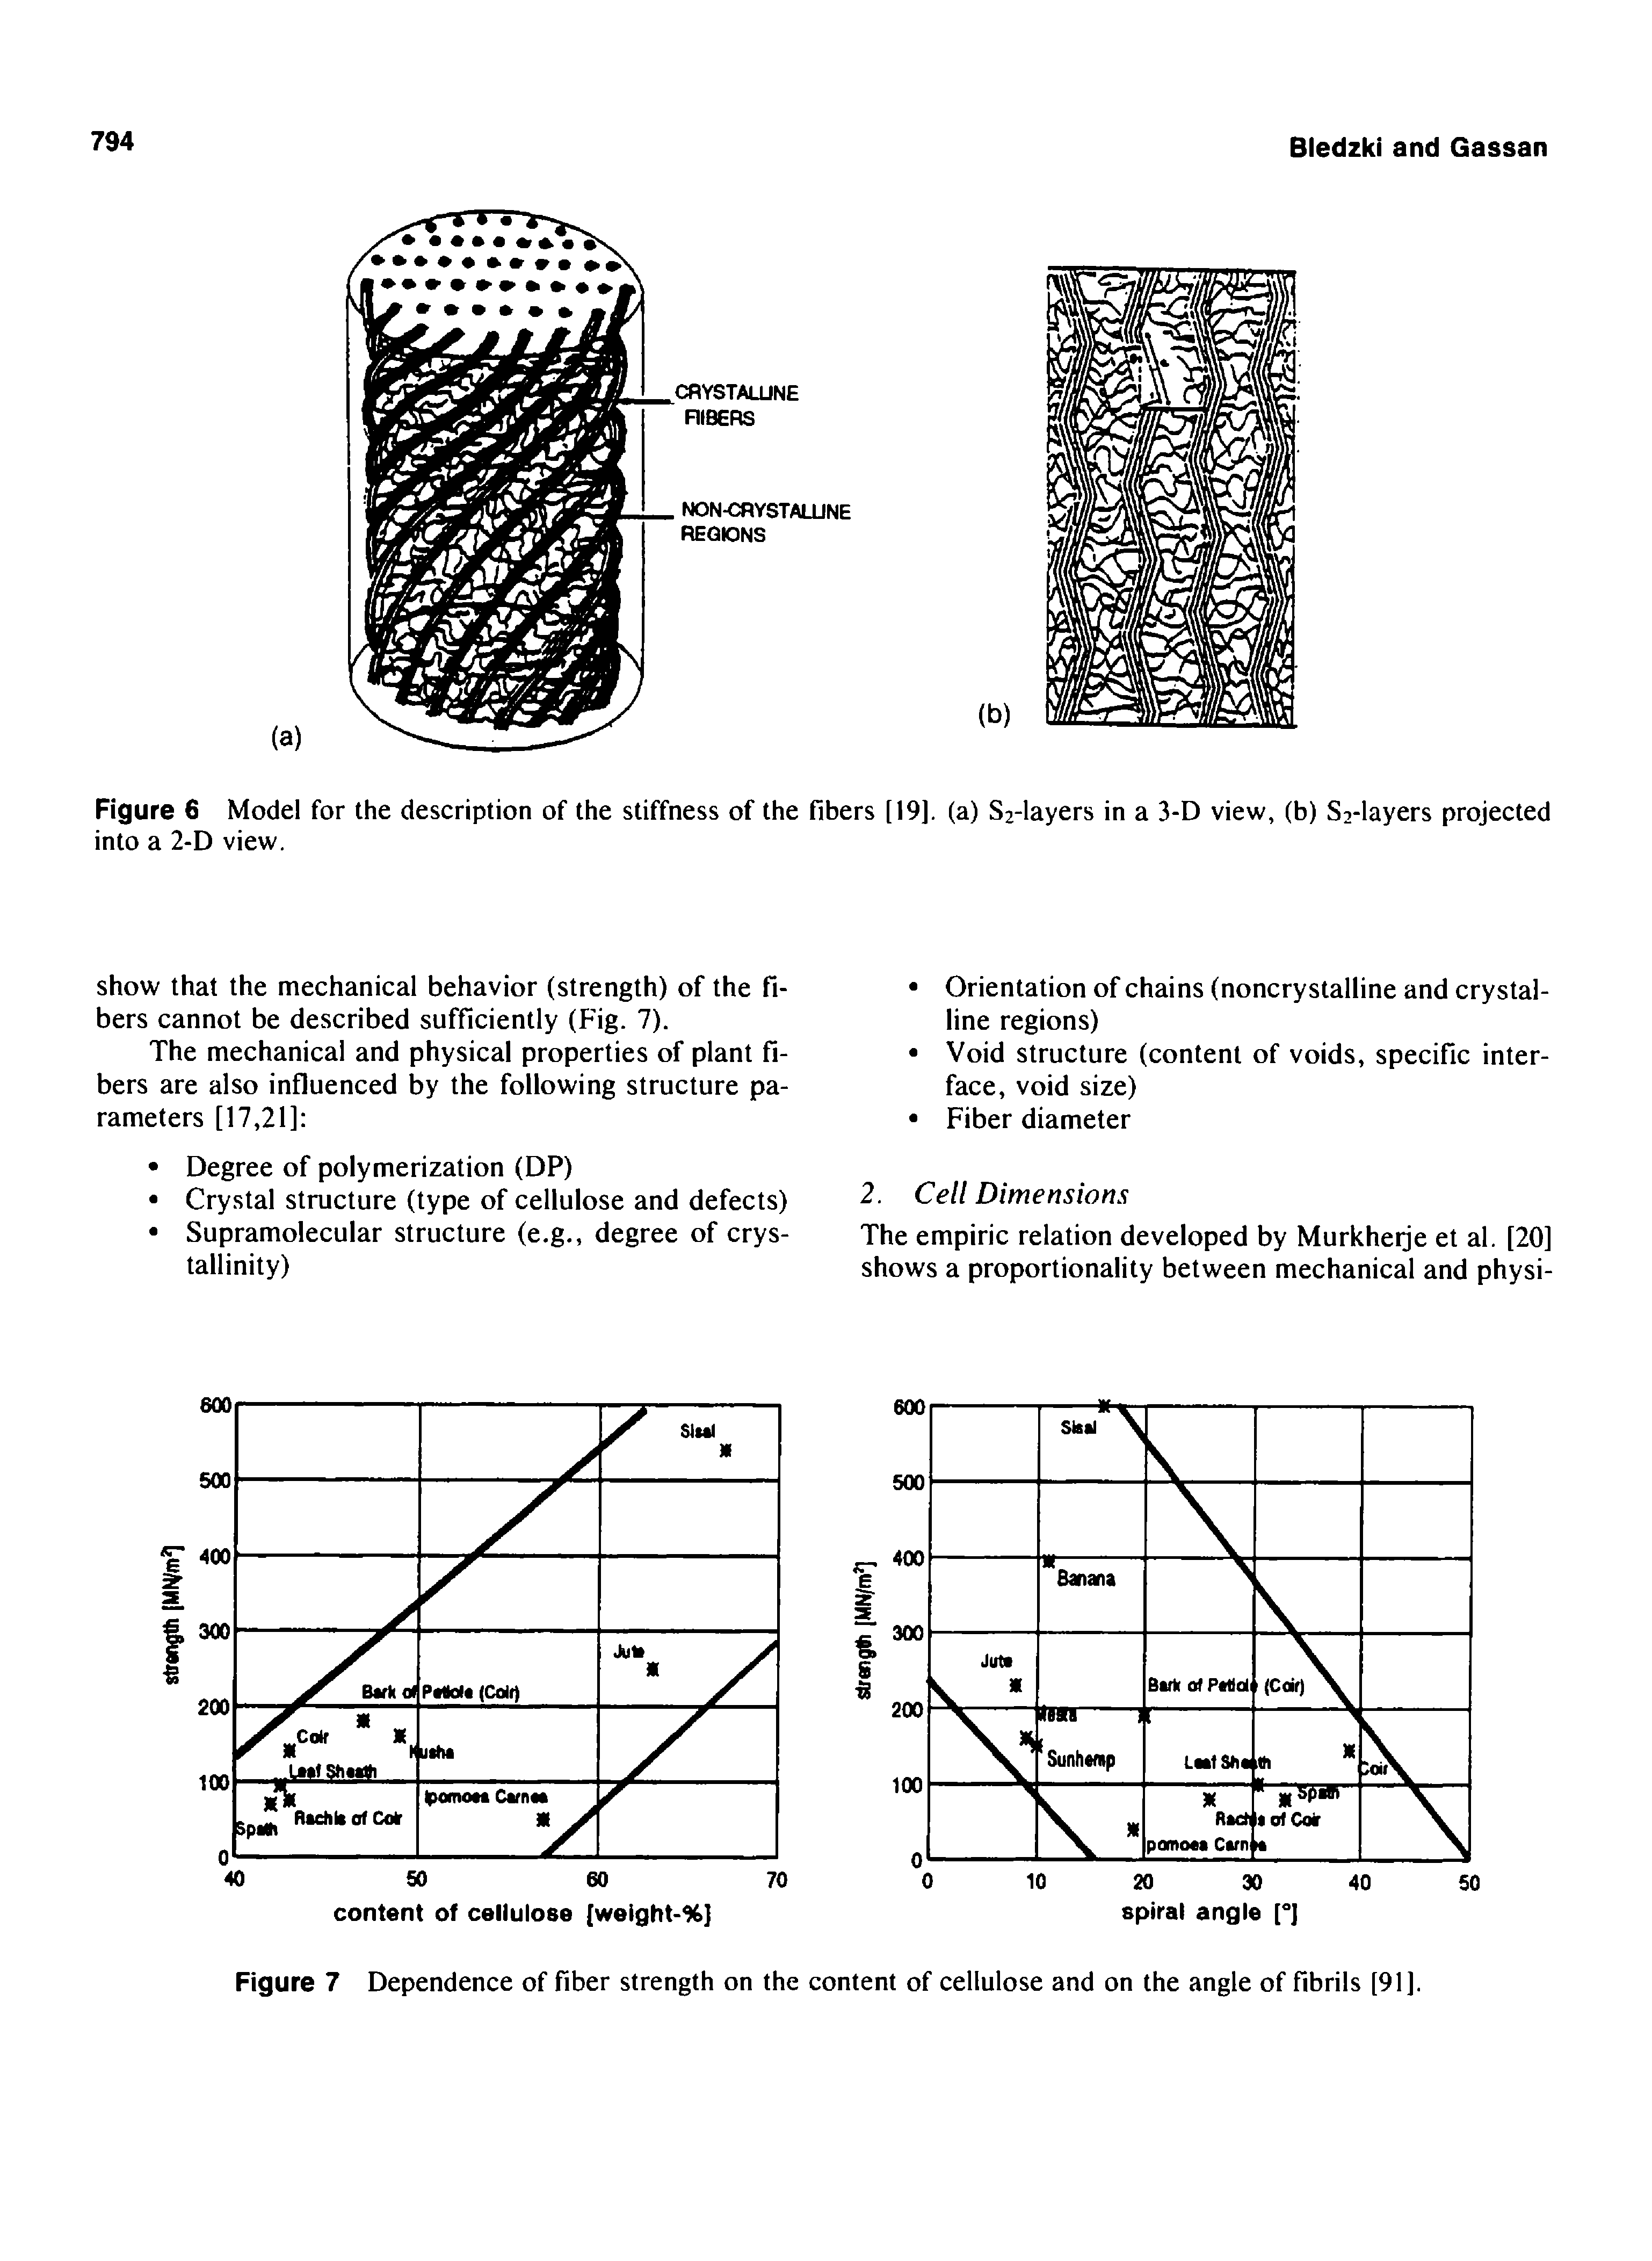 Figure 7 Dependence of fiber strength on the content of cellulose and on the angle of fibrils [91].